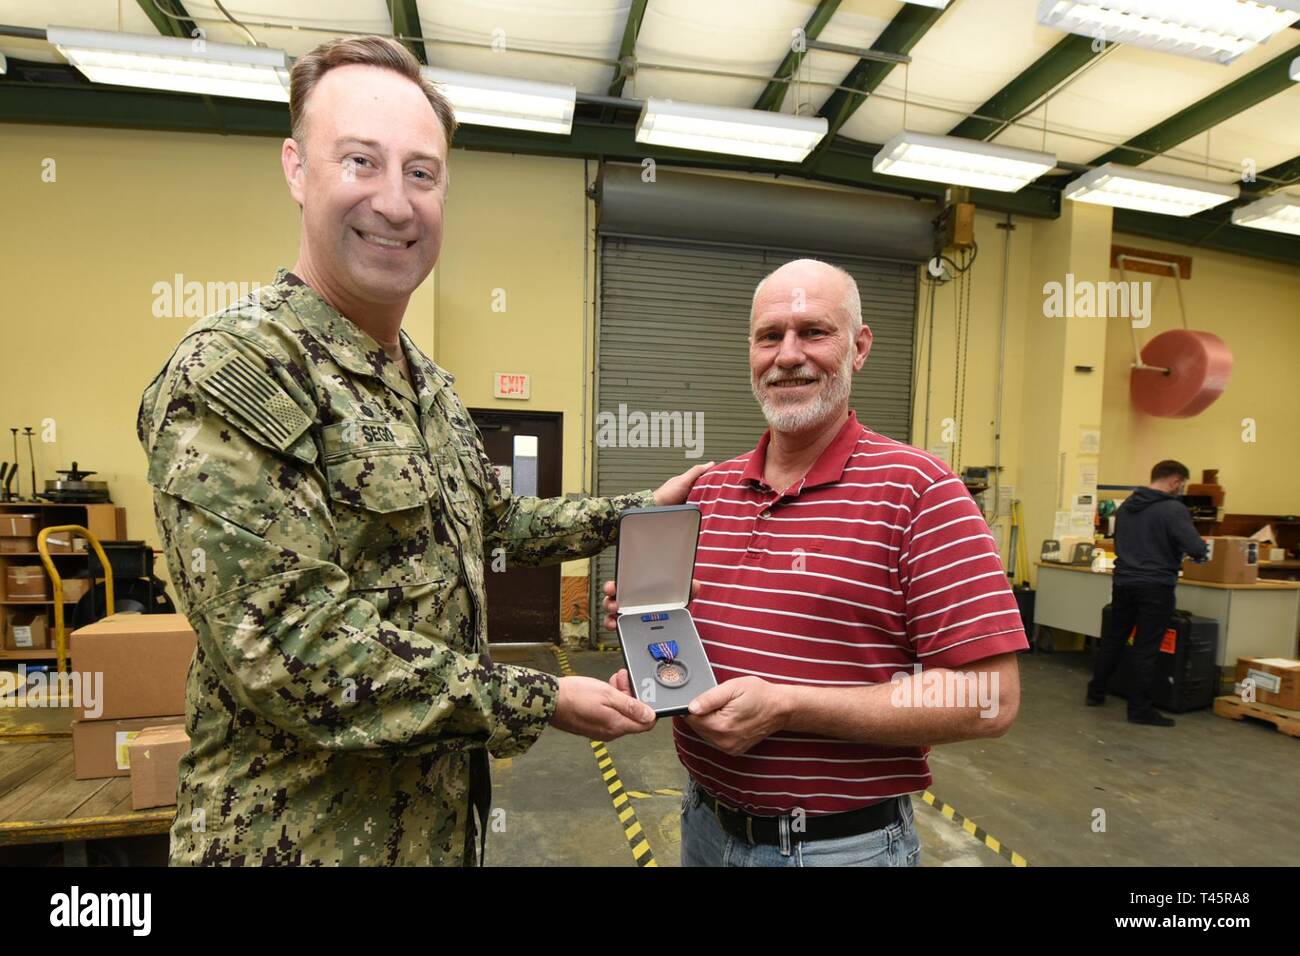 Panama City, FL -- (Mar. 7, 2019) Mr. Marty Walsh, site director for Naval Supply Command Fleet Logistics Center- Panama City is presented the Navy Meritorious Civilian Service Award by Naval Support Activity Panama City commanding officer Cmdr. Jay Sego on behalf of the Fleet Logistics Center Jacksonville.  Mr. Walsh was cited for his outstanding meritorious service and superior performance of his duties while supporting the NSA Panama City Emergency Operations Center during Hurricane Michael recovery efforts.  His team quickly and effectively provided fuel, food, and water support to the bas Stock Photo